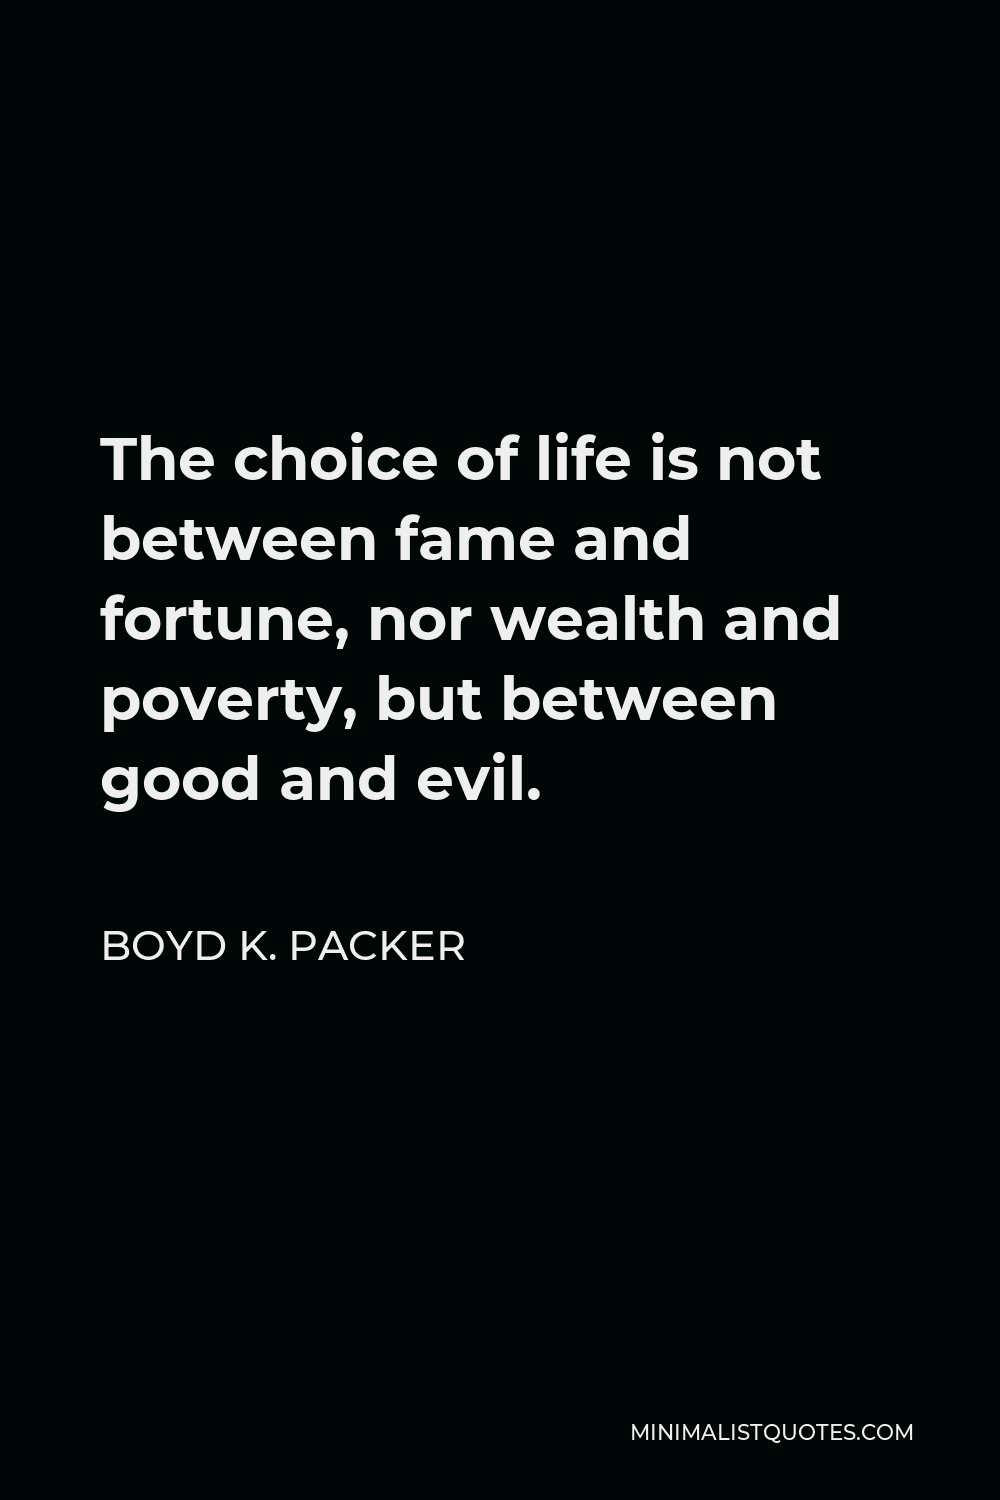 Boyd K. Packer Quote - The choice of life is not between fame and fortune, nor wealth and poverty, but between good and evil.